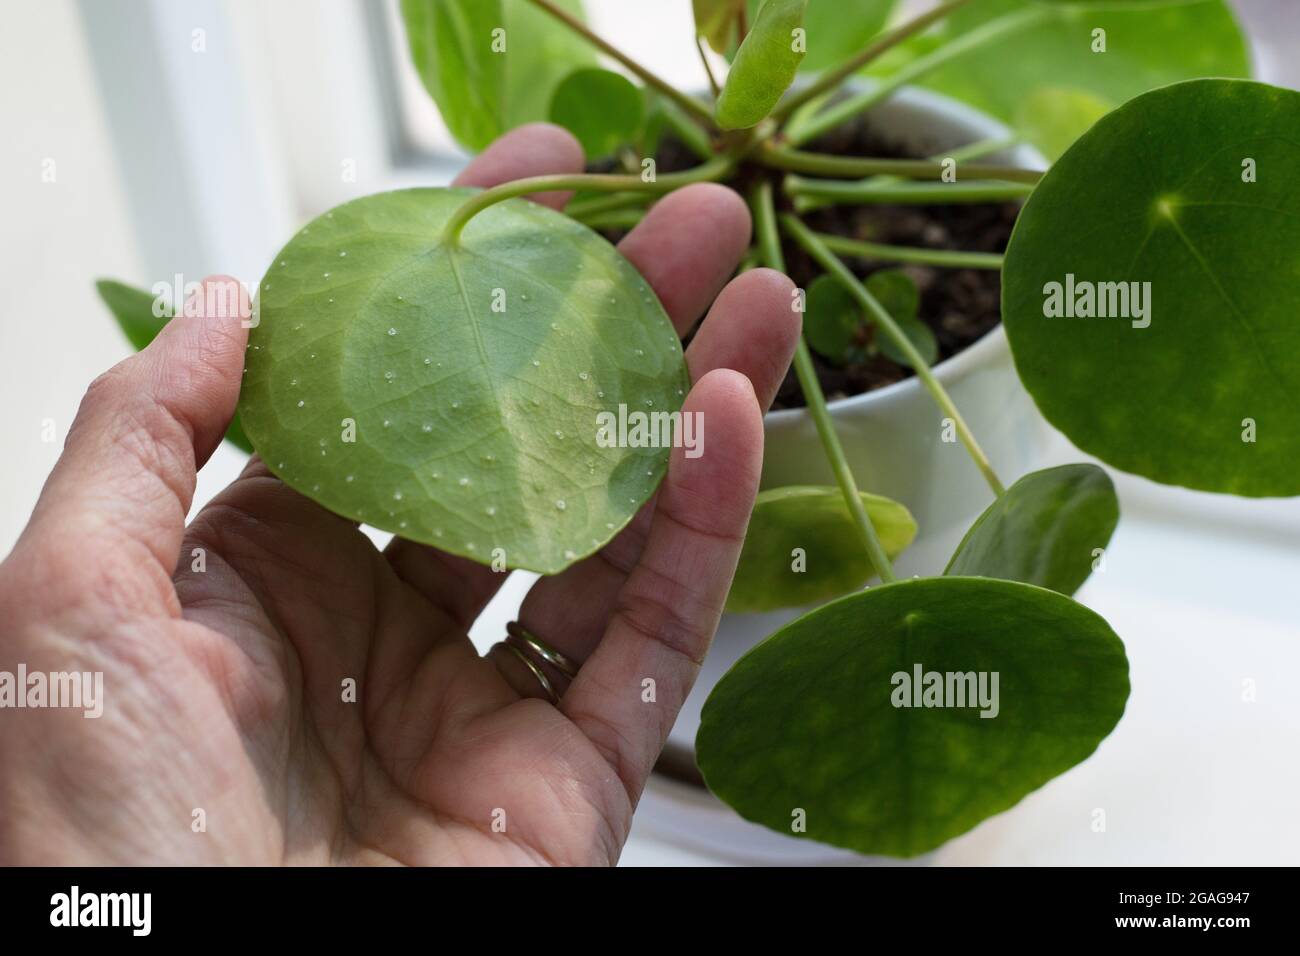 A pilea peperomioides houseplant with mineral deposits on the underside of leaves, a normal condition. Stock Photo